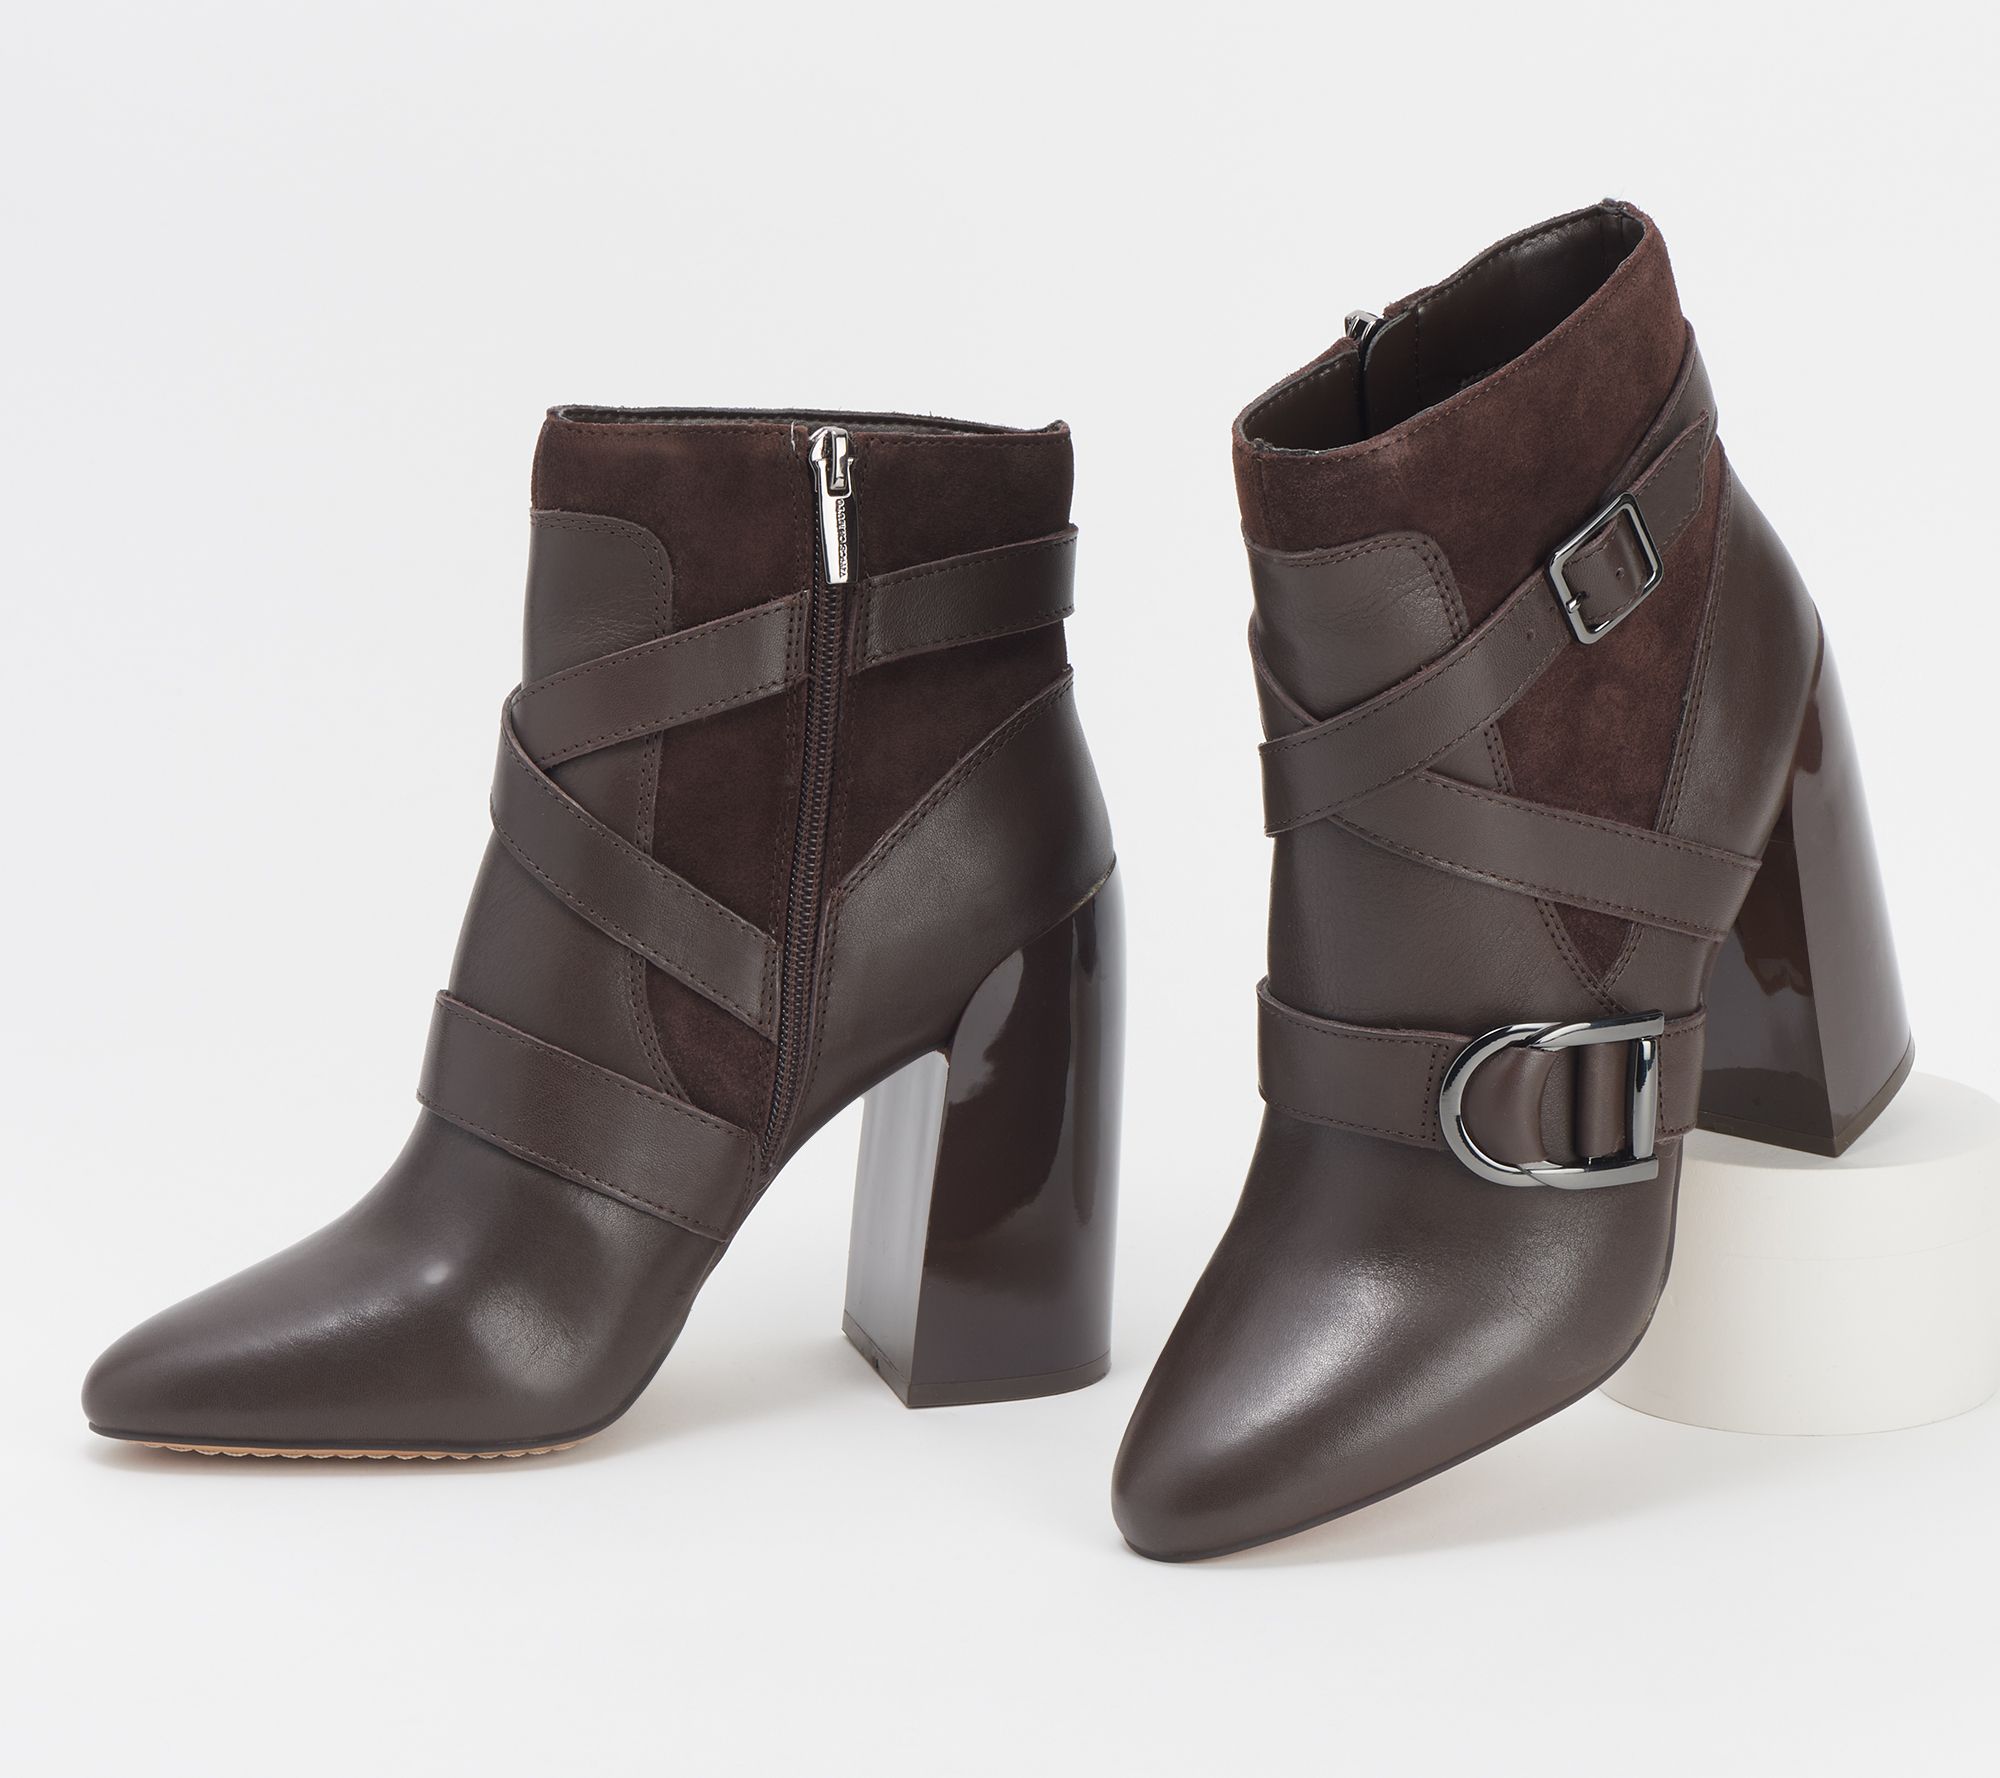 Vince Camuto Leather or Suede Mid Shaft Boots - Quindele 